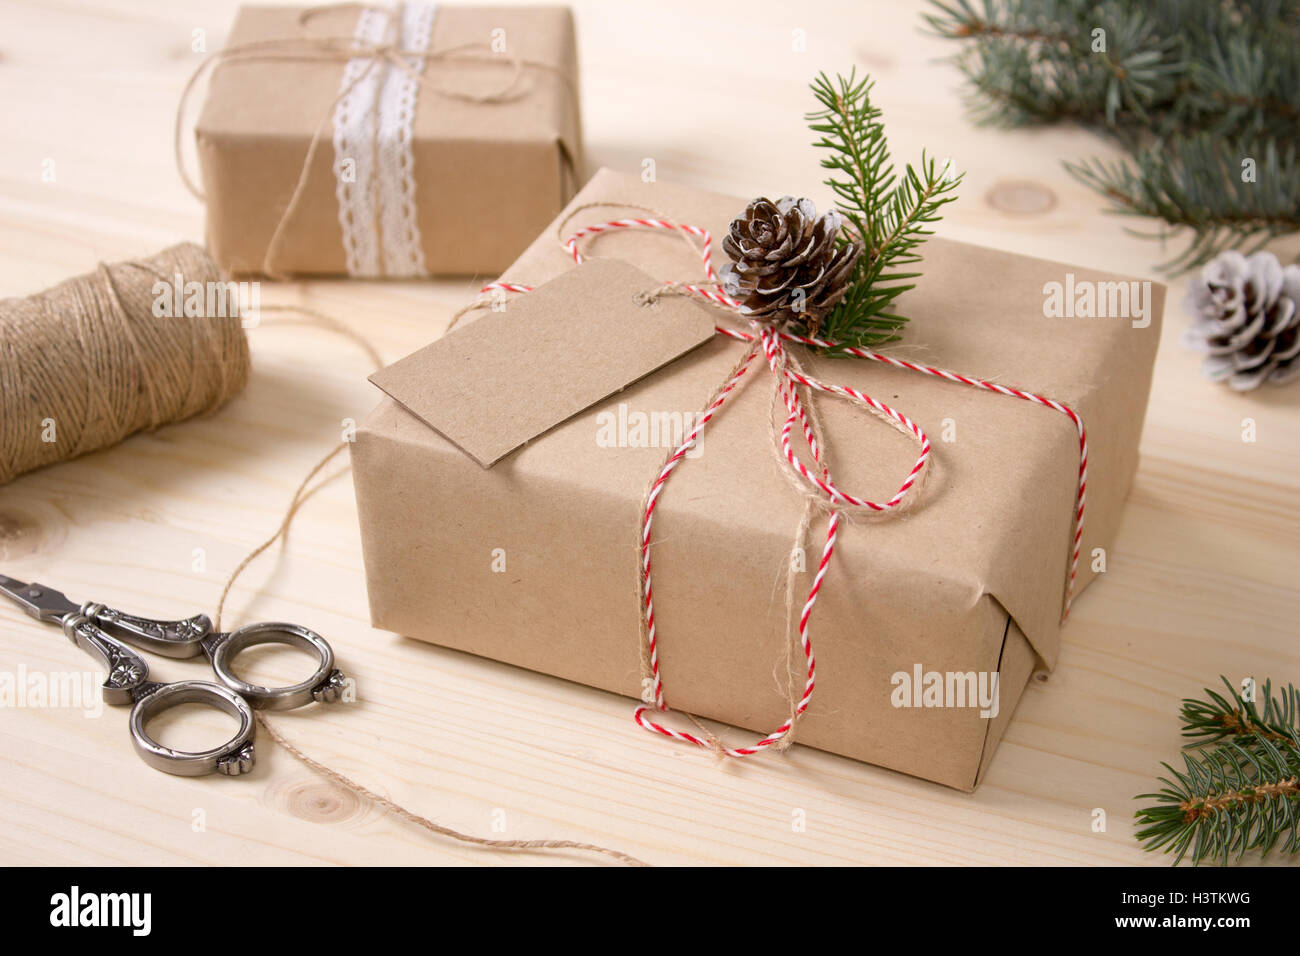 Christmas Gift Box with Tag, Mock-up. Craft Items Set. Wooden Background. Stock Photo